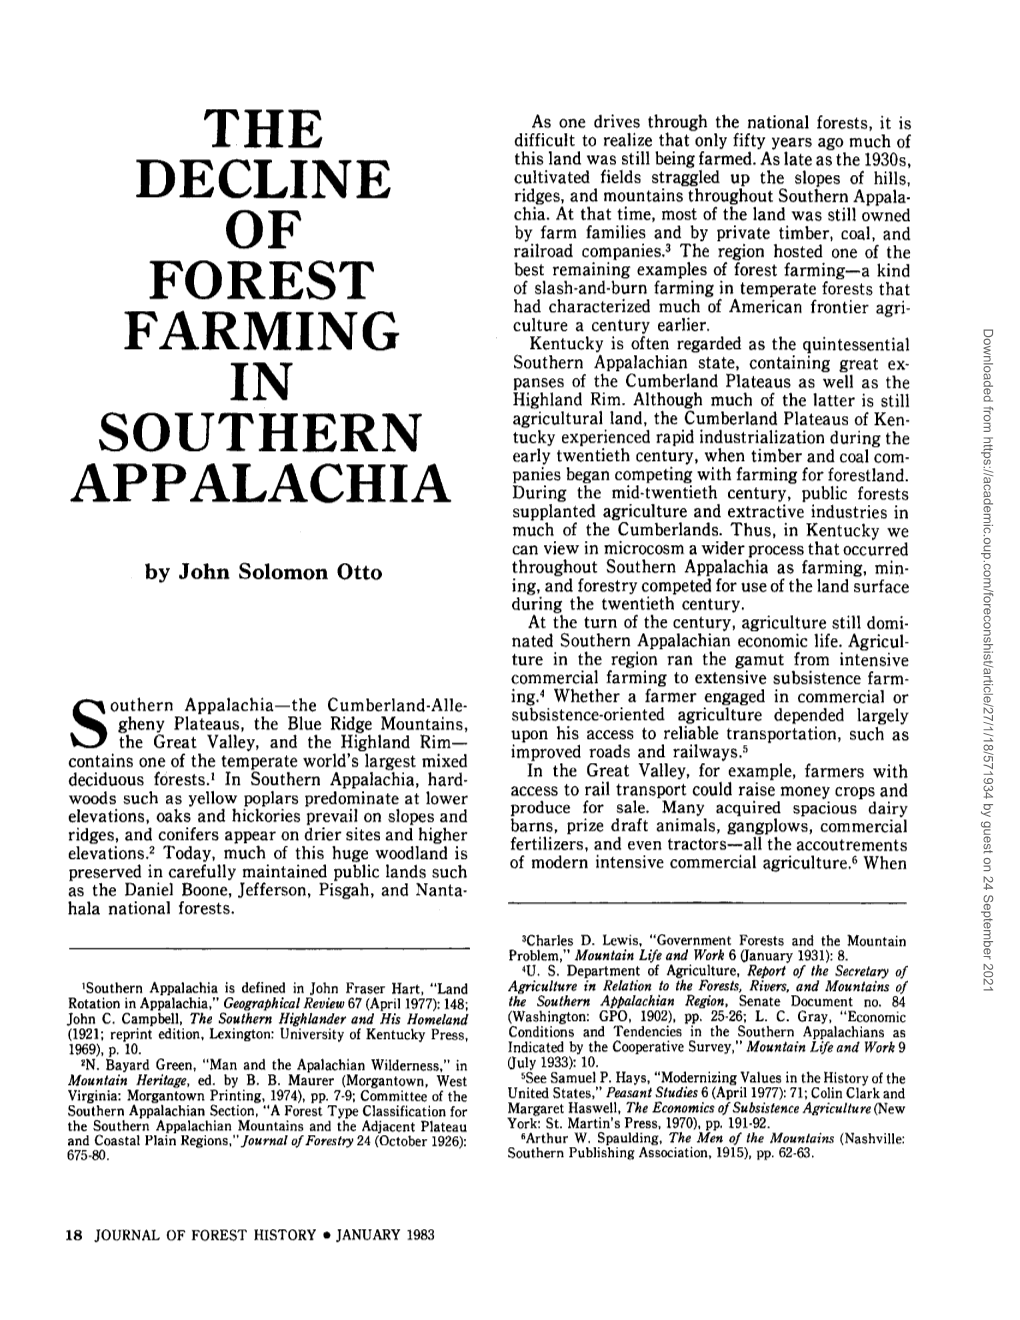 The Decline of Forest Farming in Southern Appalachia